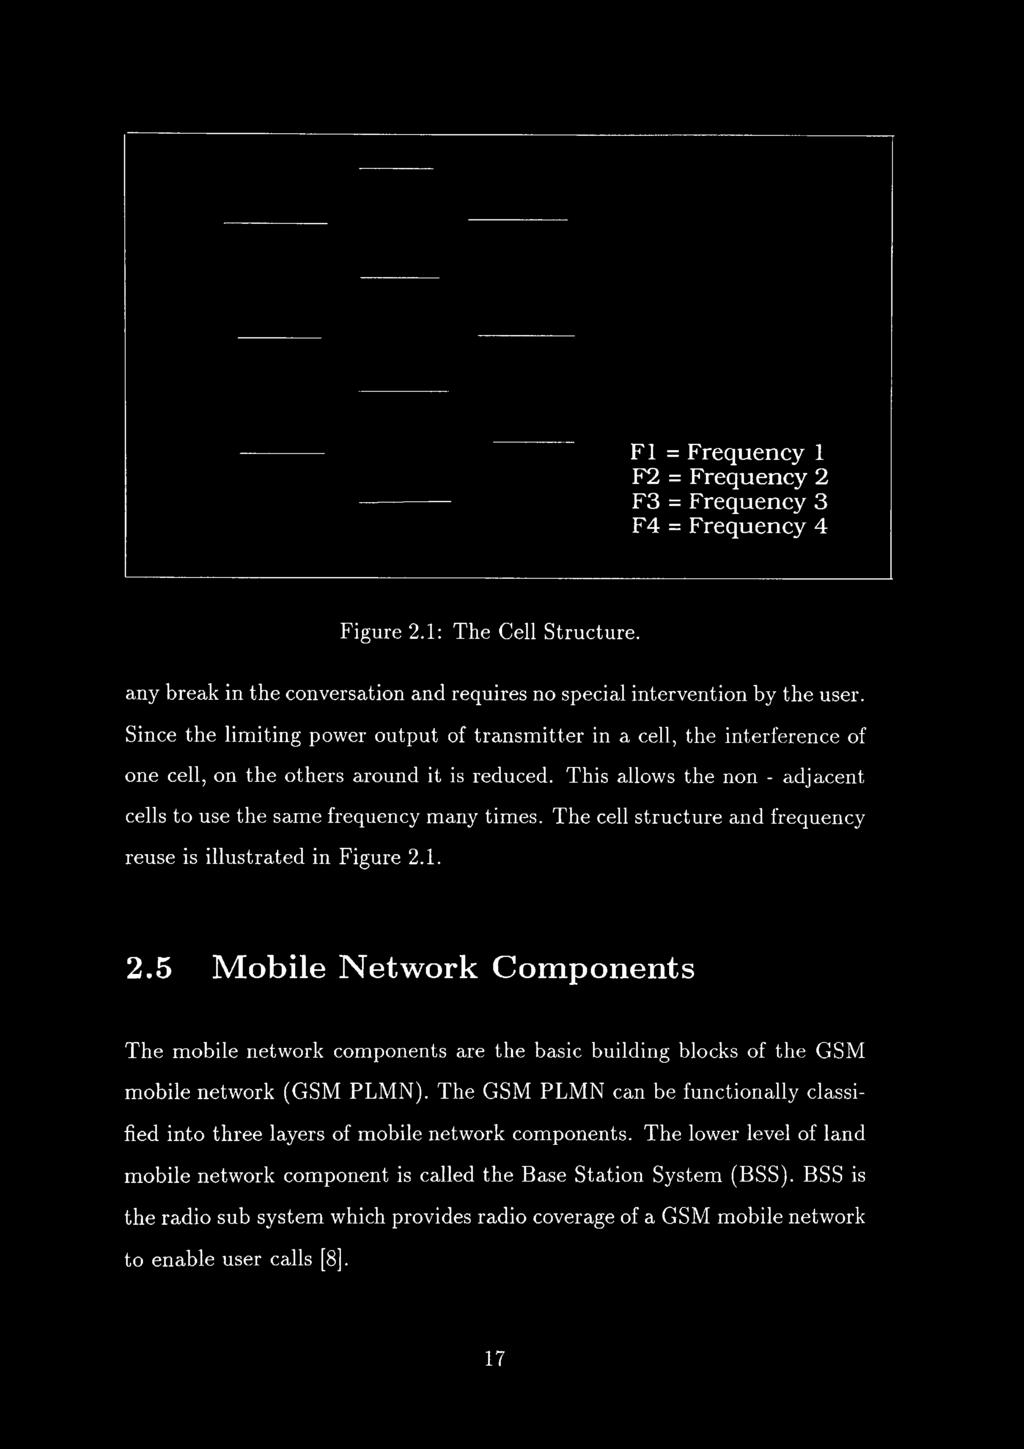 The cell structure and frequency reuse is illustrated in Figure 2.1. 2.5 Mobile Network Components The mobile network components are the basic building blocks of the GSM mobile network (GSM PLMN).